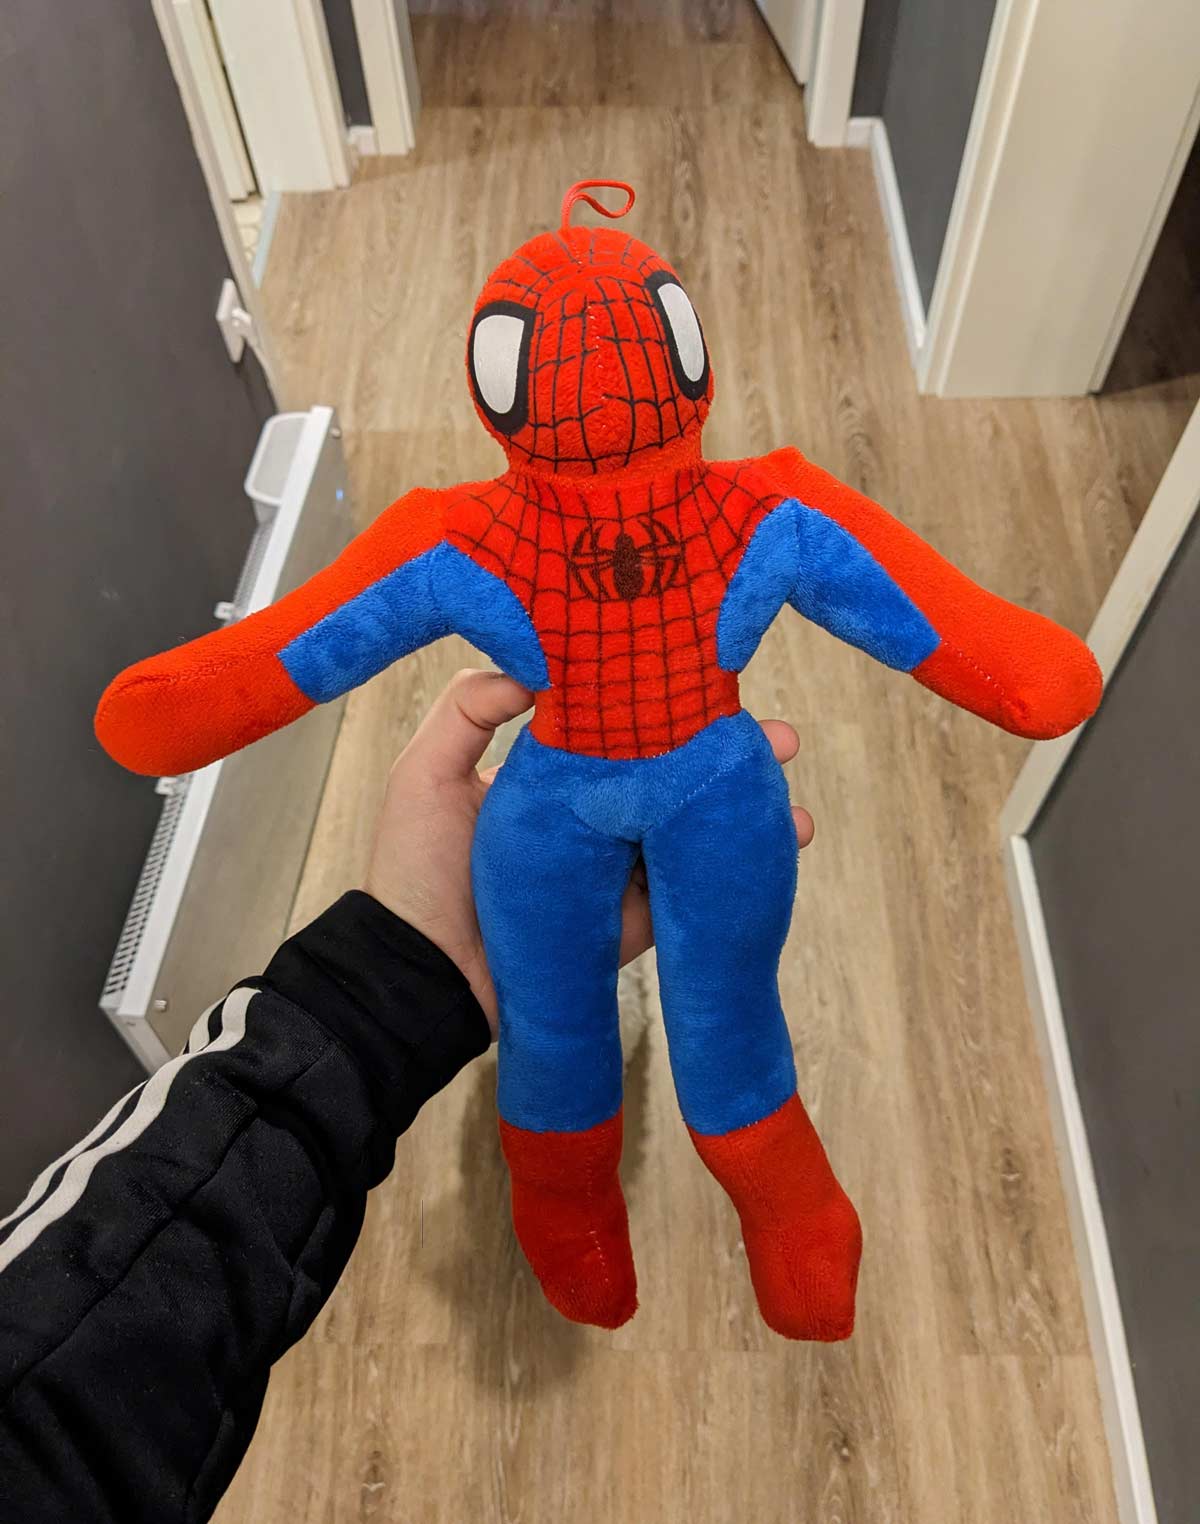 My kids received this spider-man as a gift